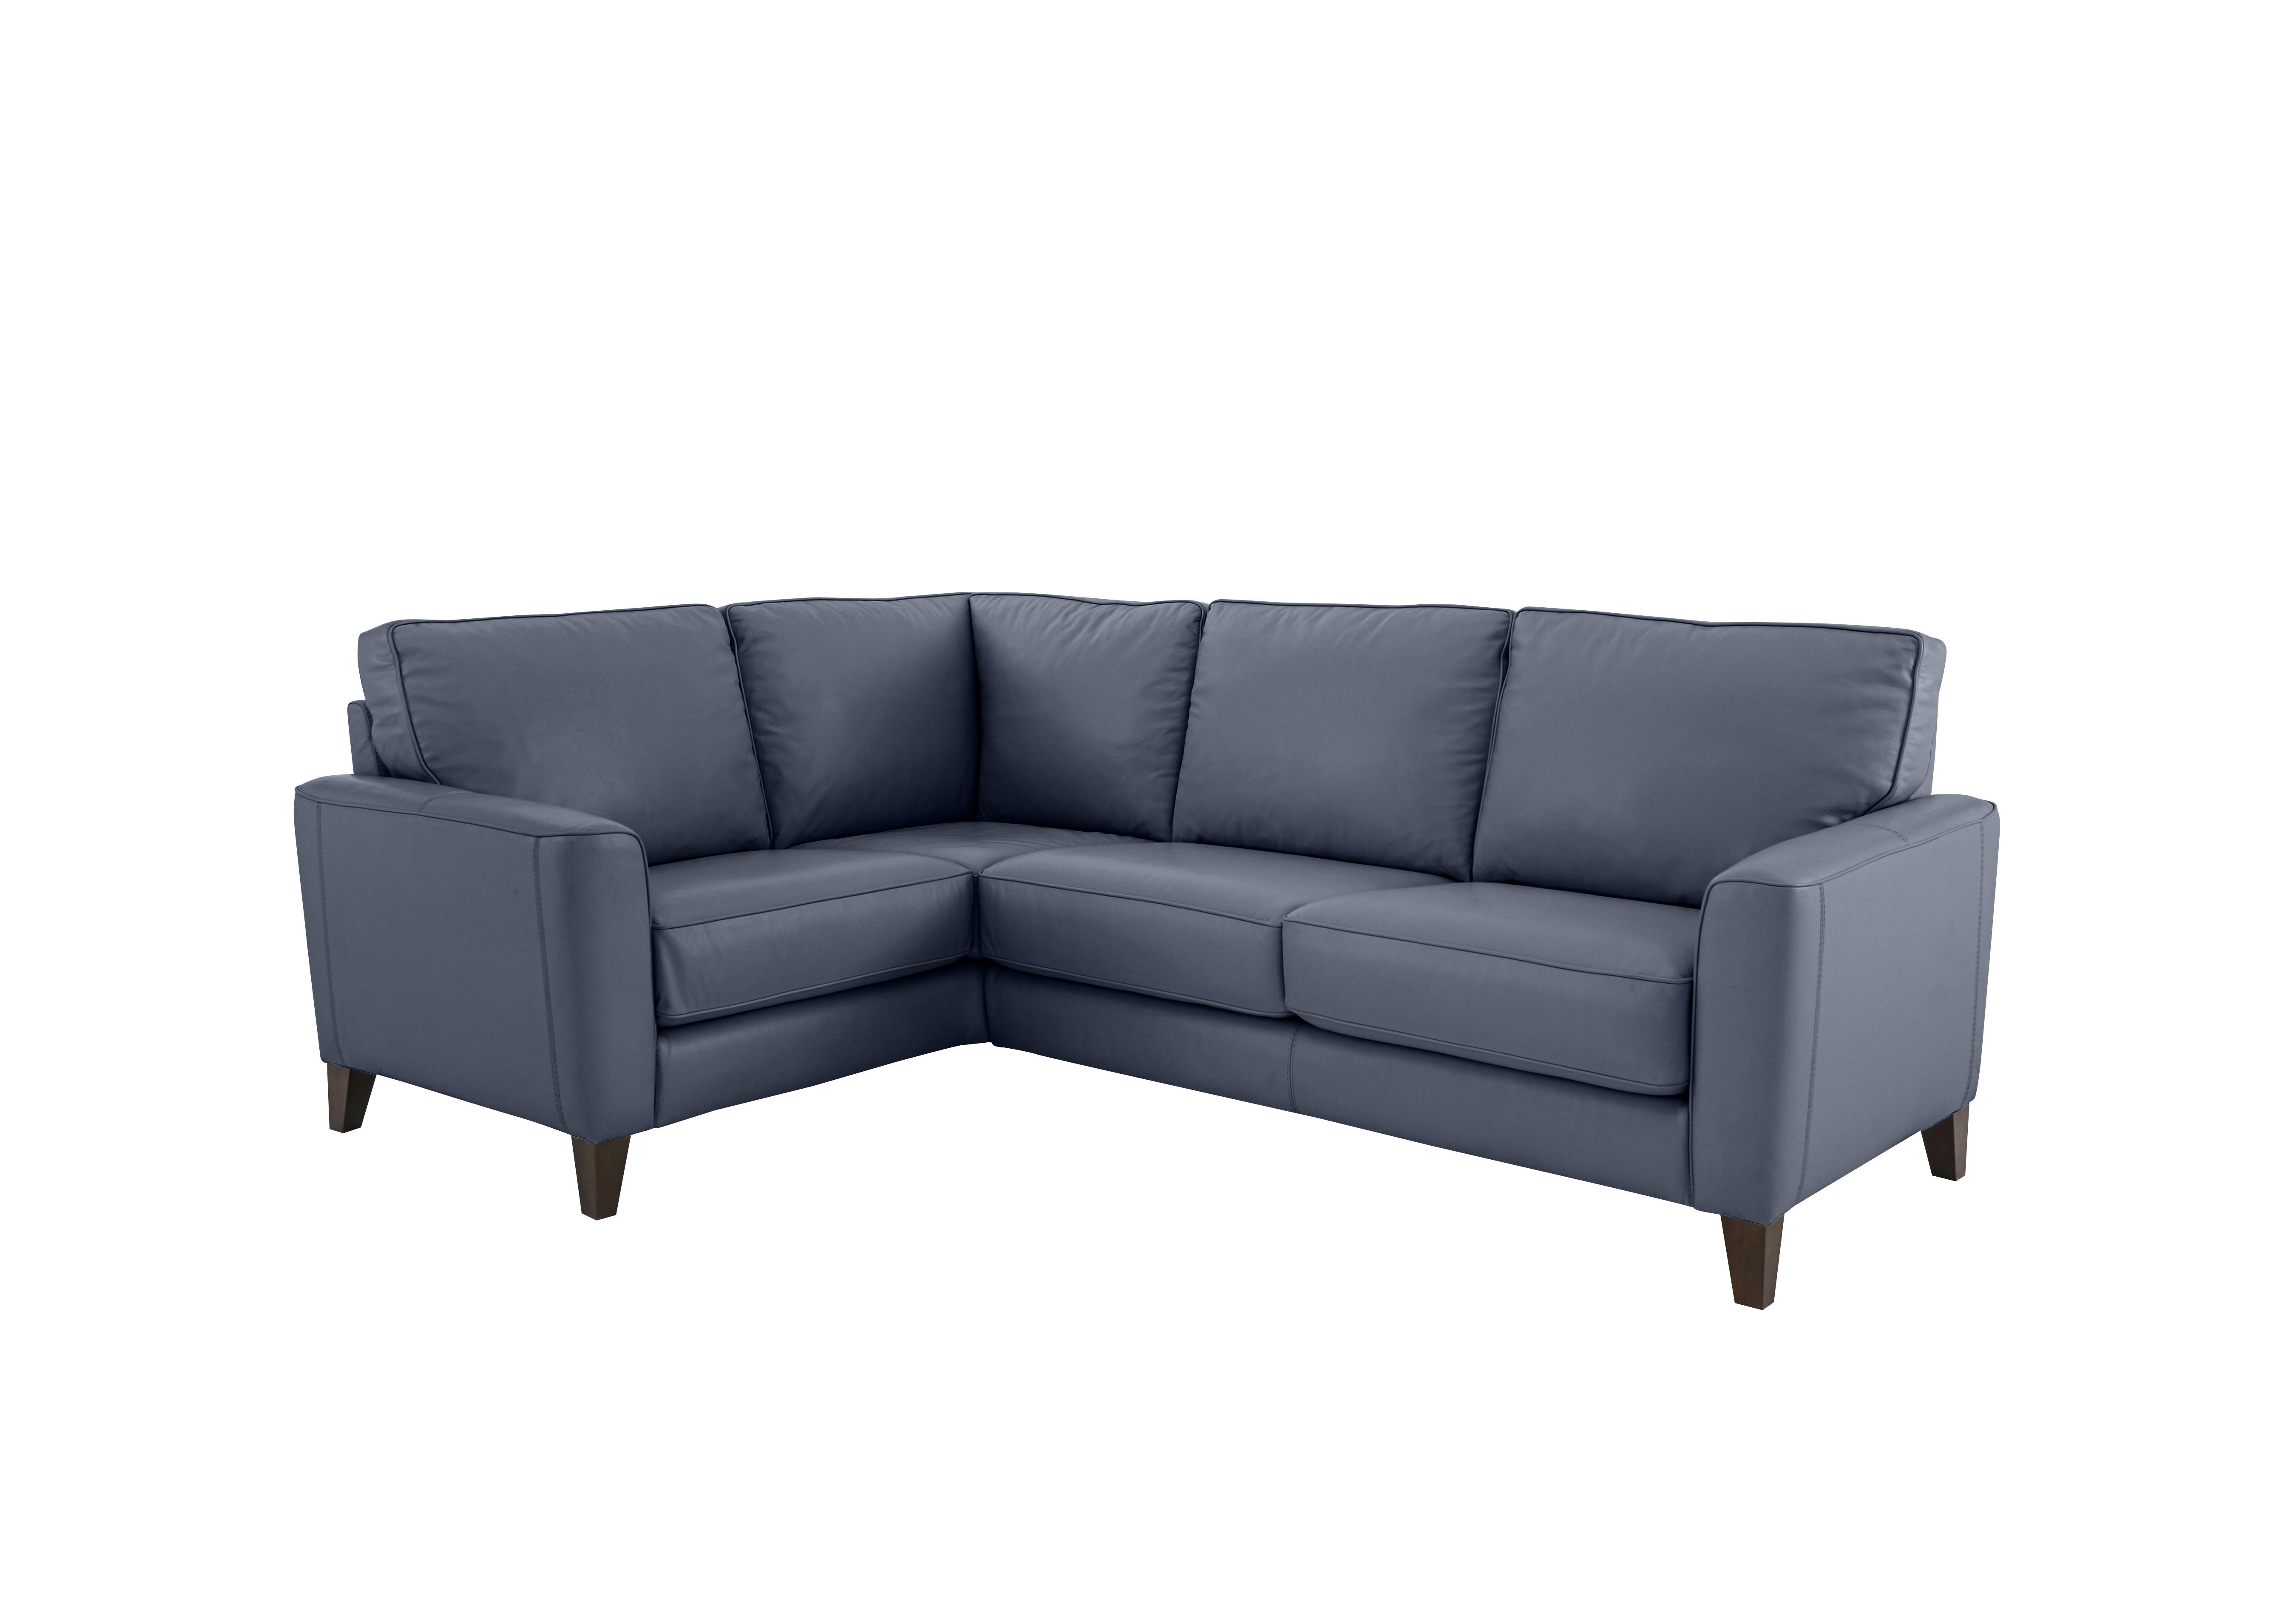 Brondby Small Leather Corner Sofa in Bv-313e Ocean Blue on Furniture Village